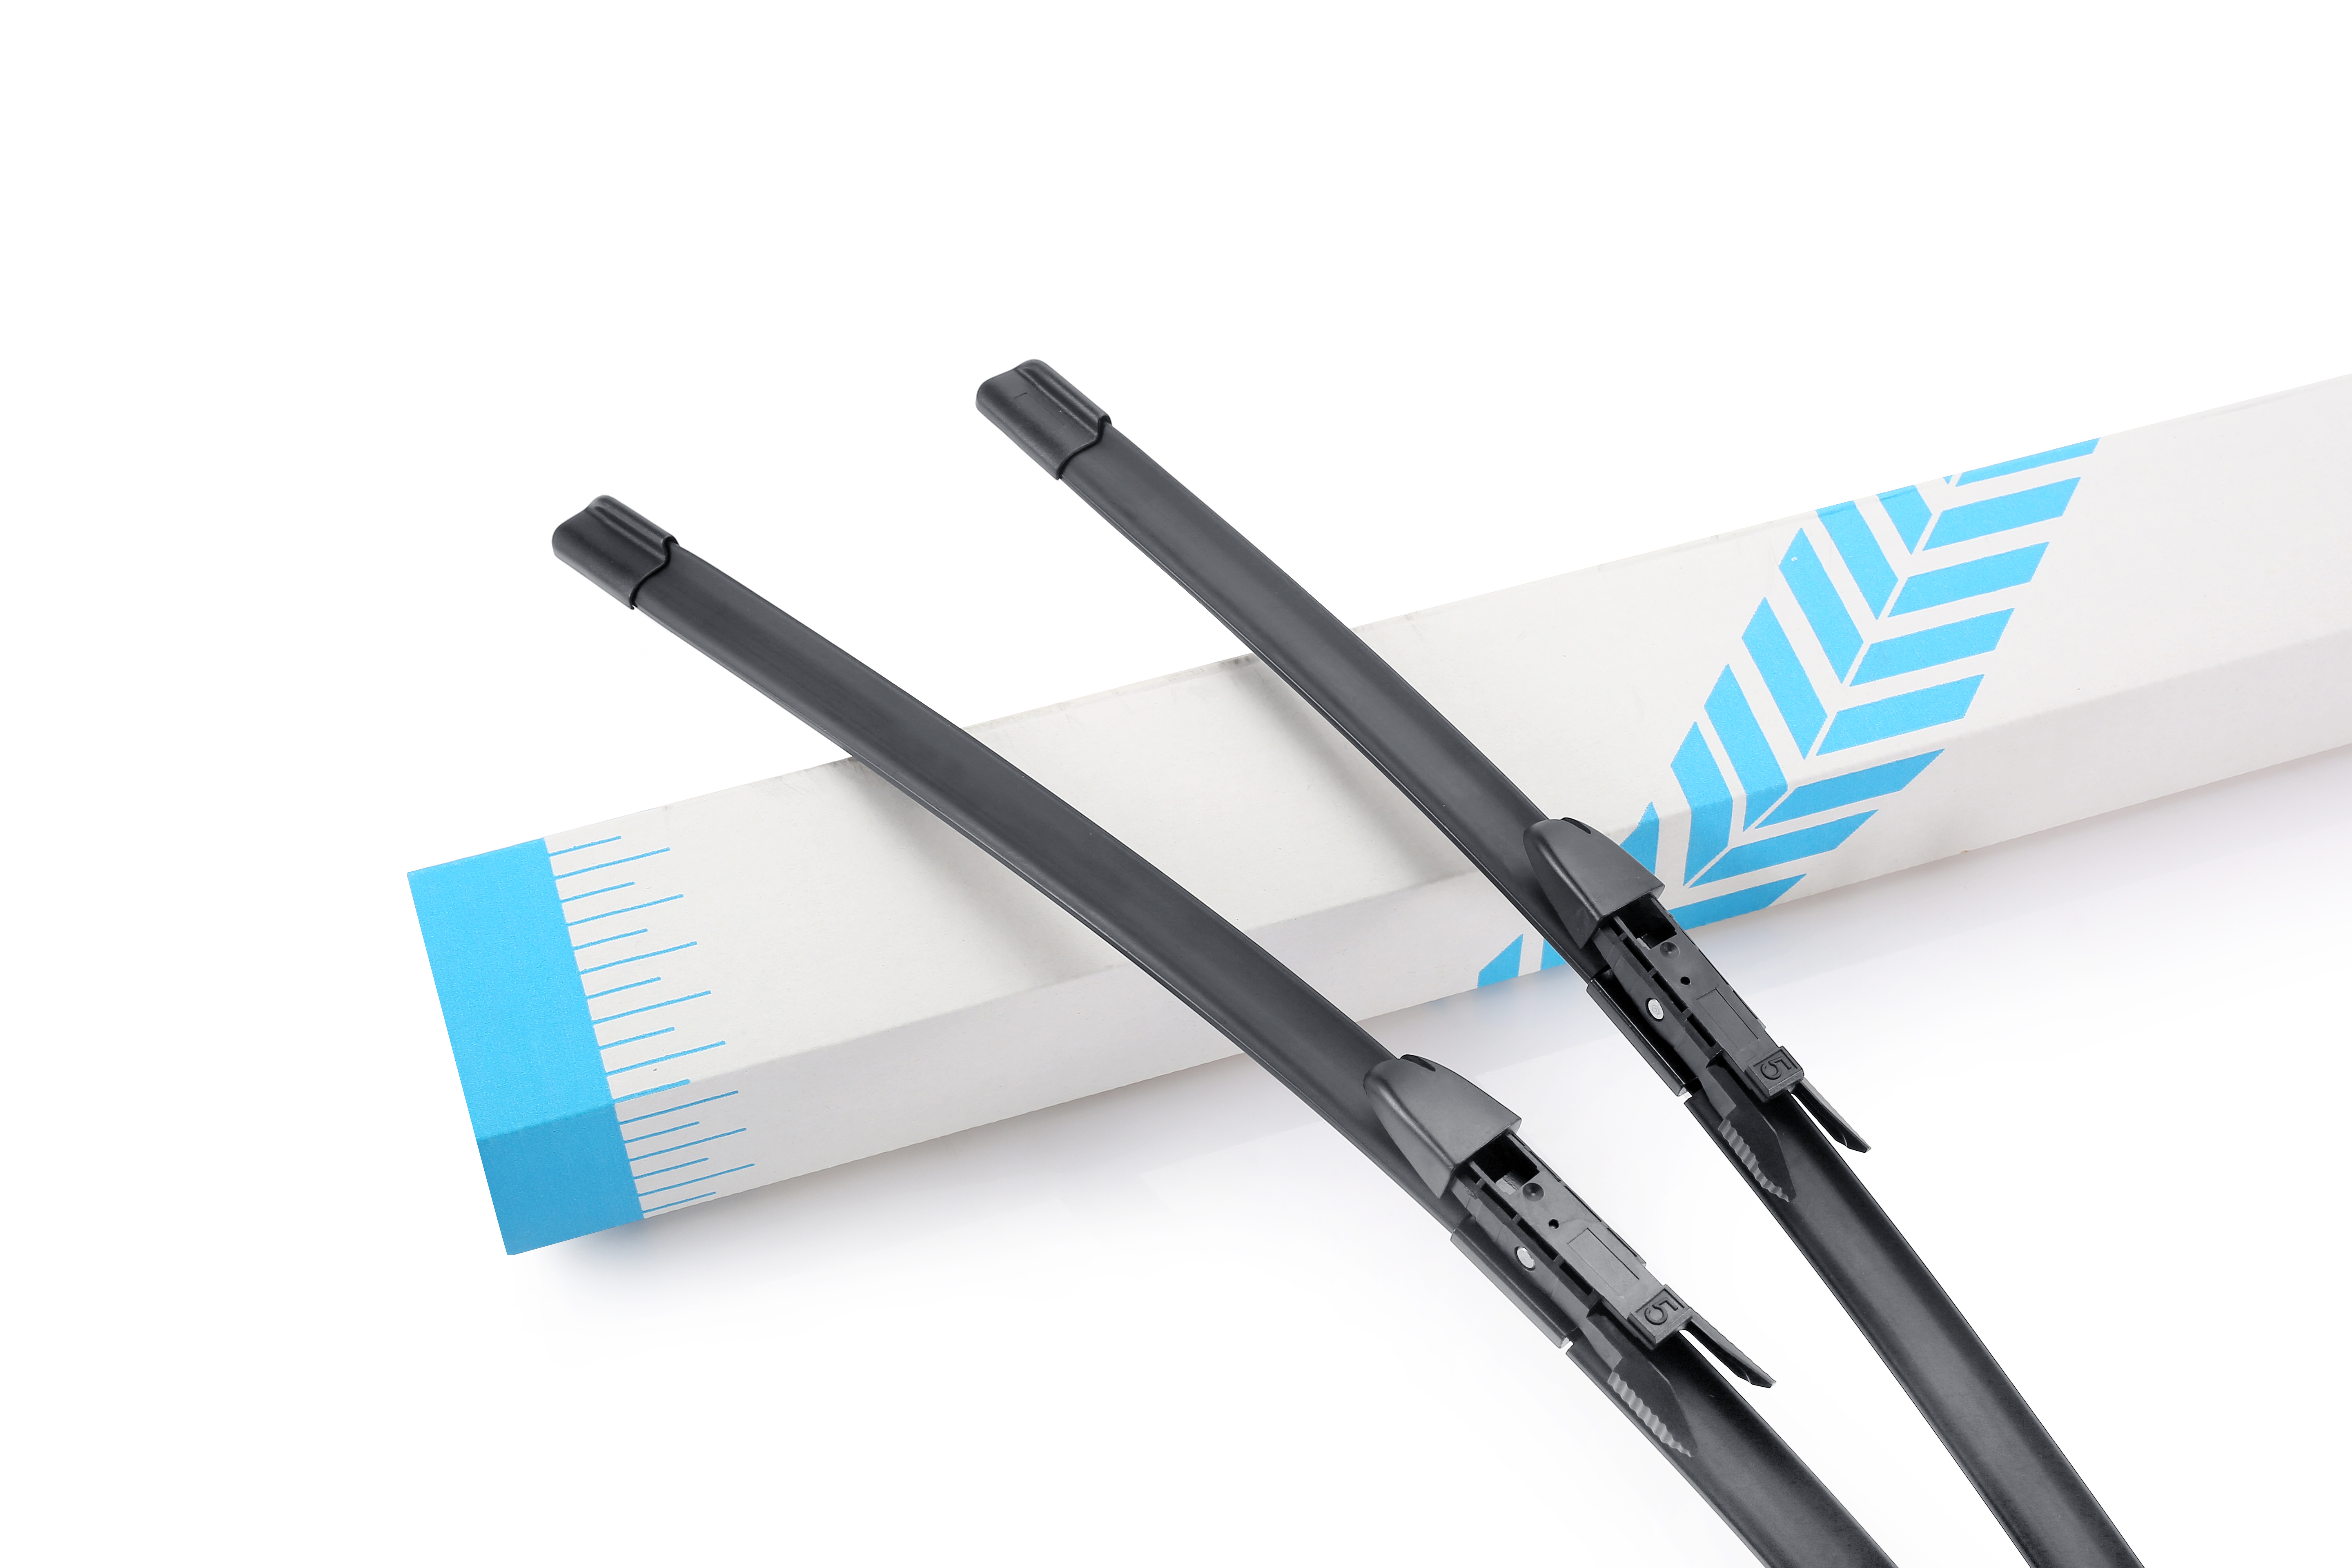 What are the advantages of precisely fitting wiper blades?